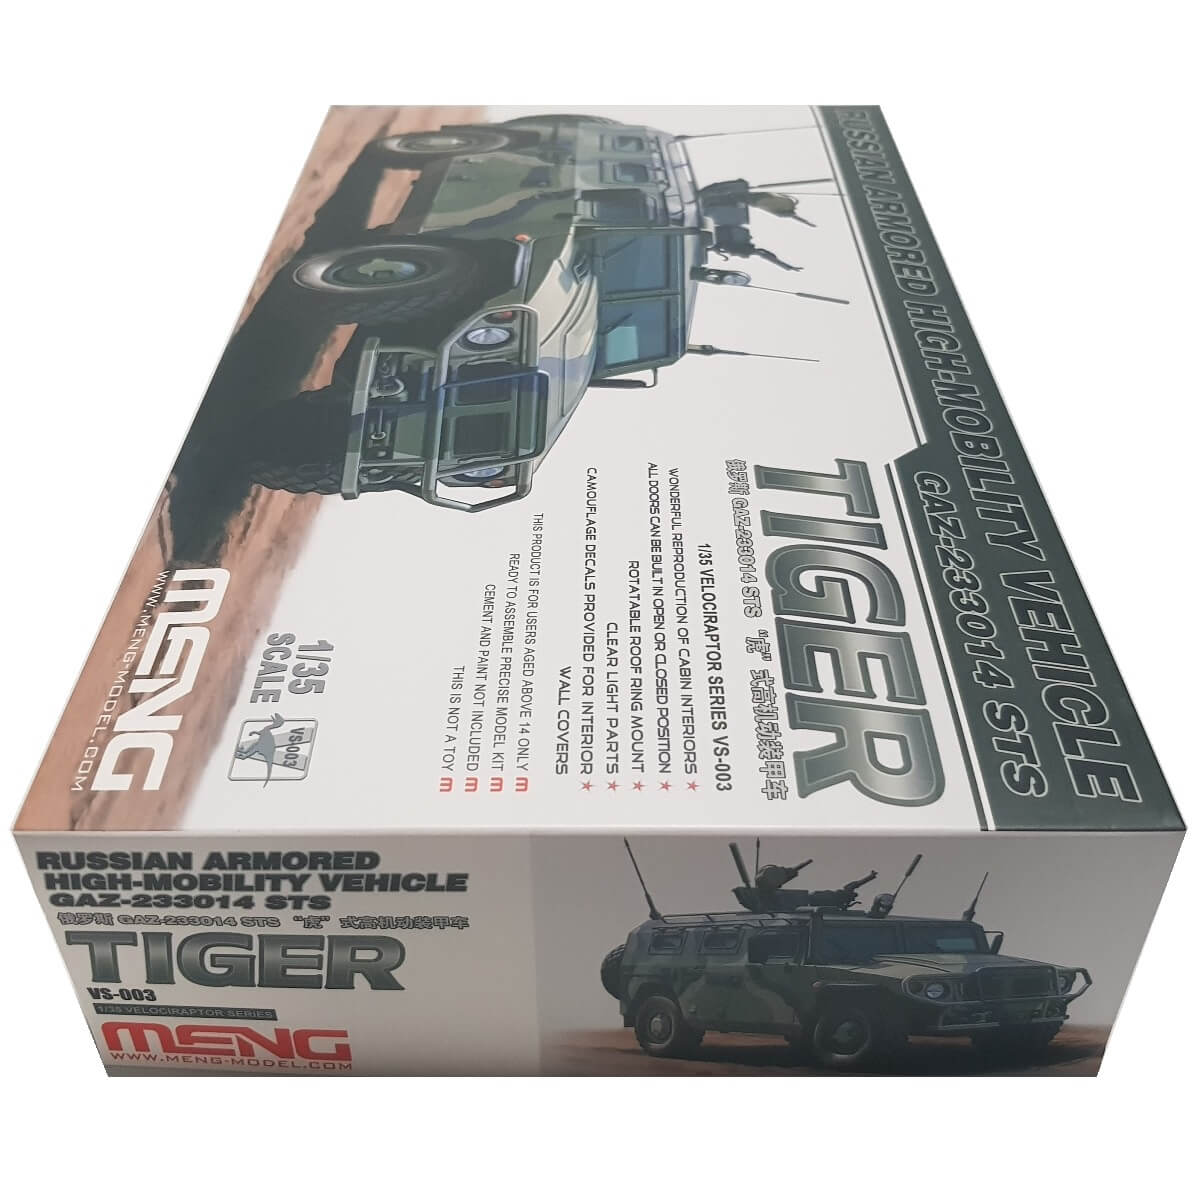 1:35 Russian Armored High-Mobility Vehicle - GAZ-233014 STS Tiger - MENG